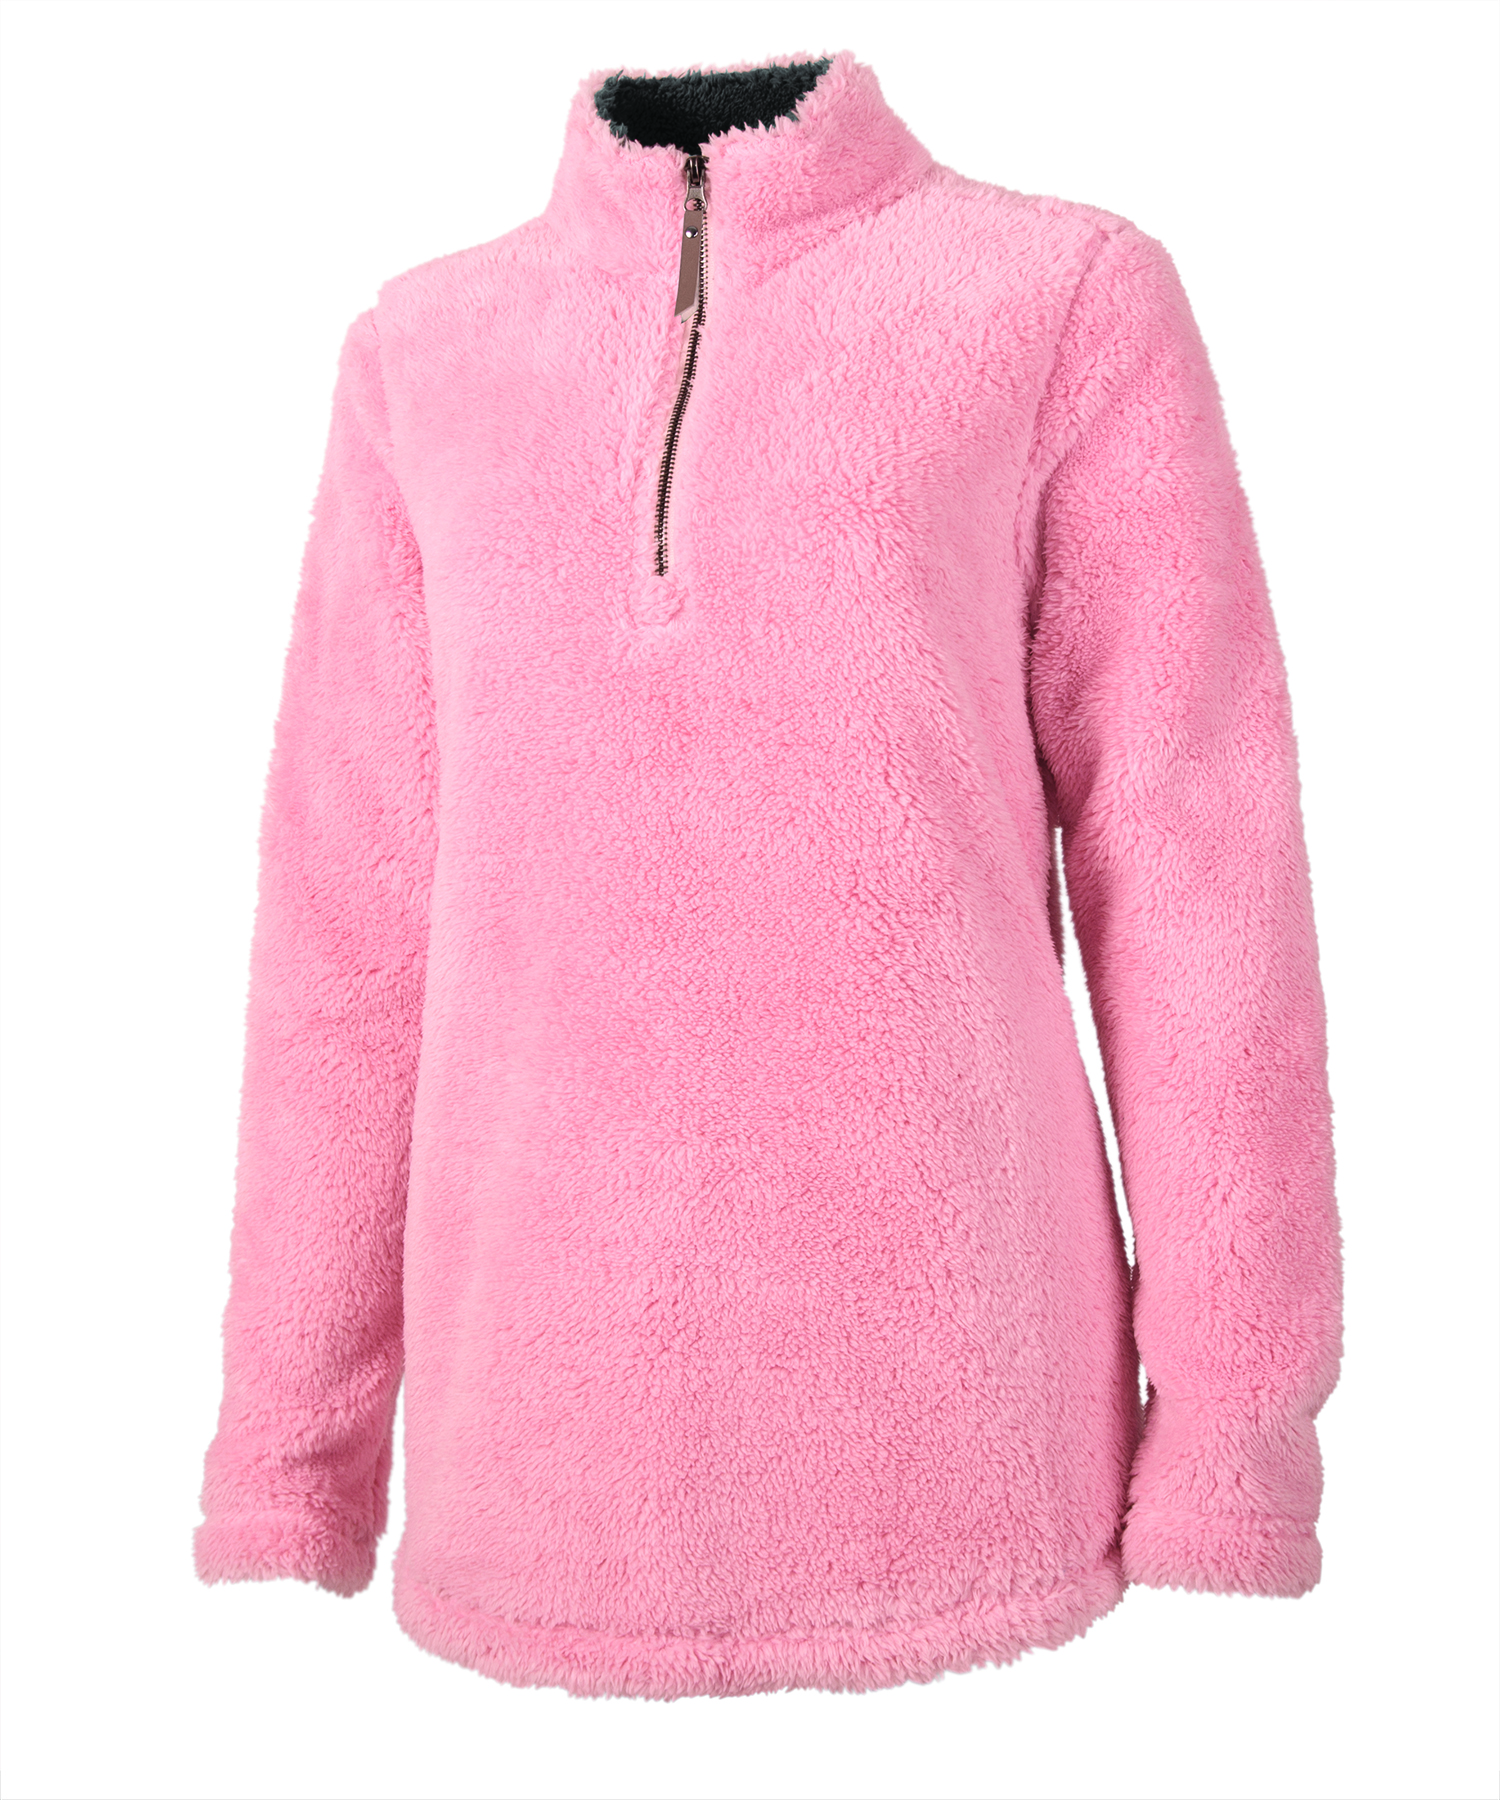 Charles River Apparel Women’s Newport Fleece Pullover Style 5876 Front Powder Pink.